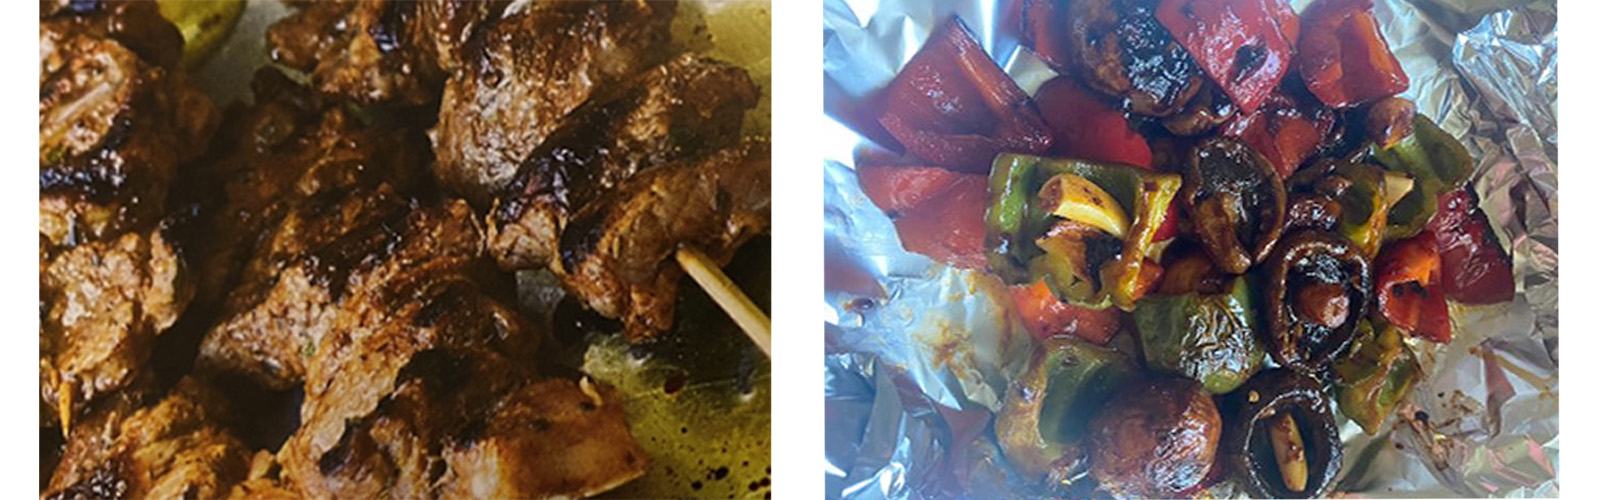 spicy jerk rub lamb kebabs (left) and vegetables cooked separately (right)